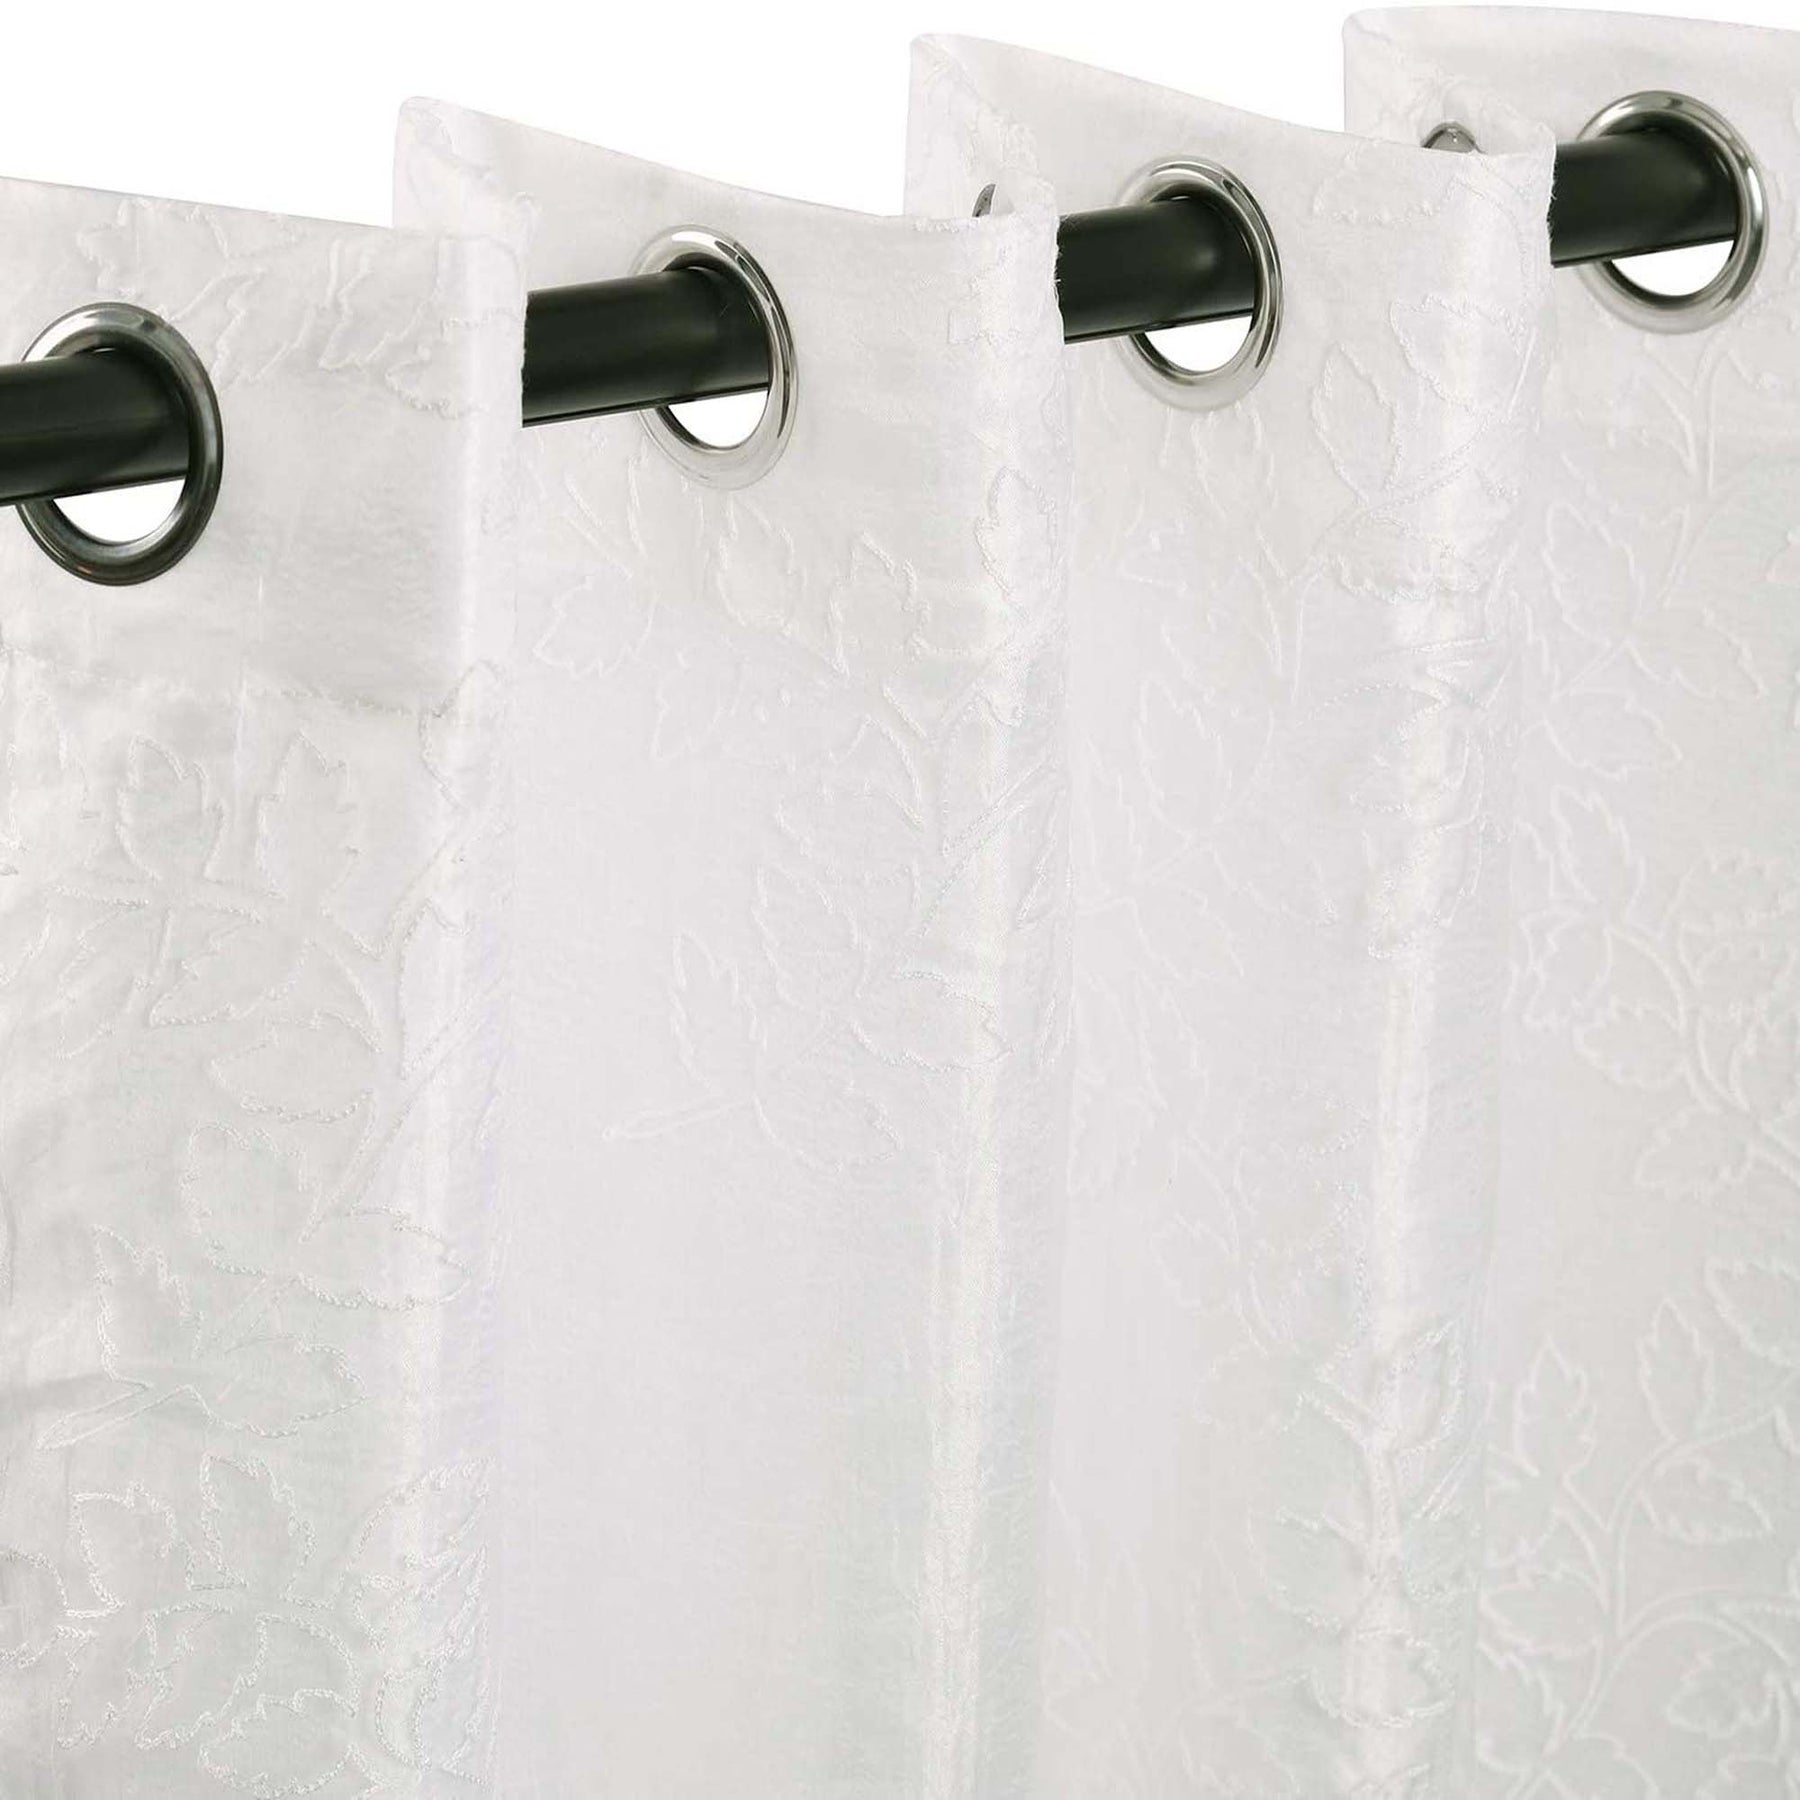 Embroidered Leaves Grommet 2 Piece Layered Sheer Curtain Panel Set - White